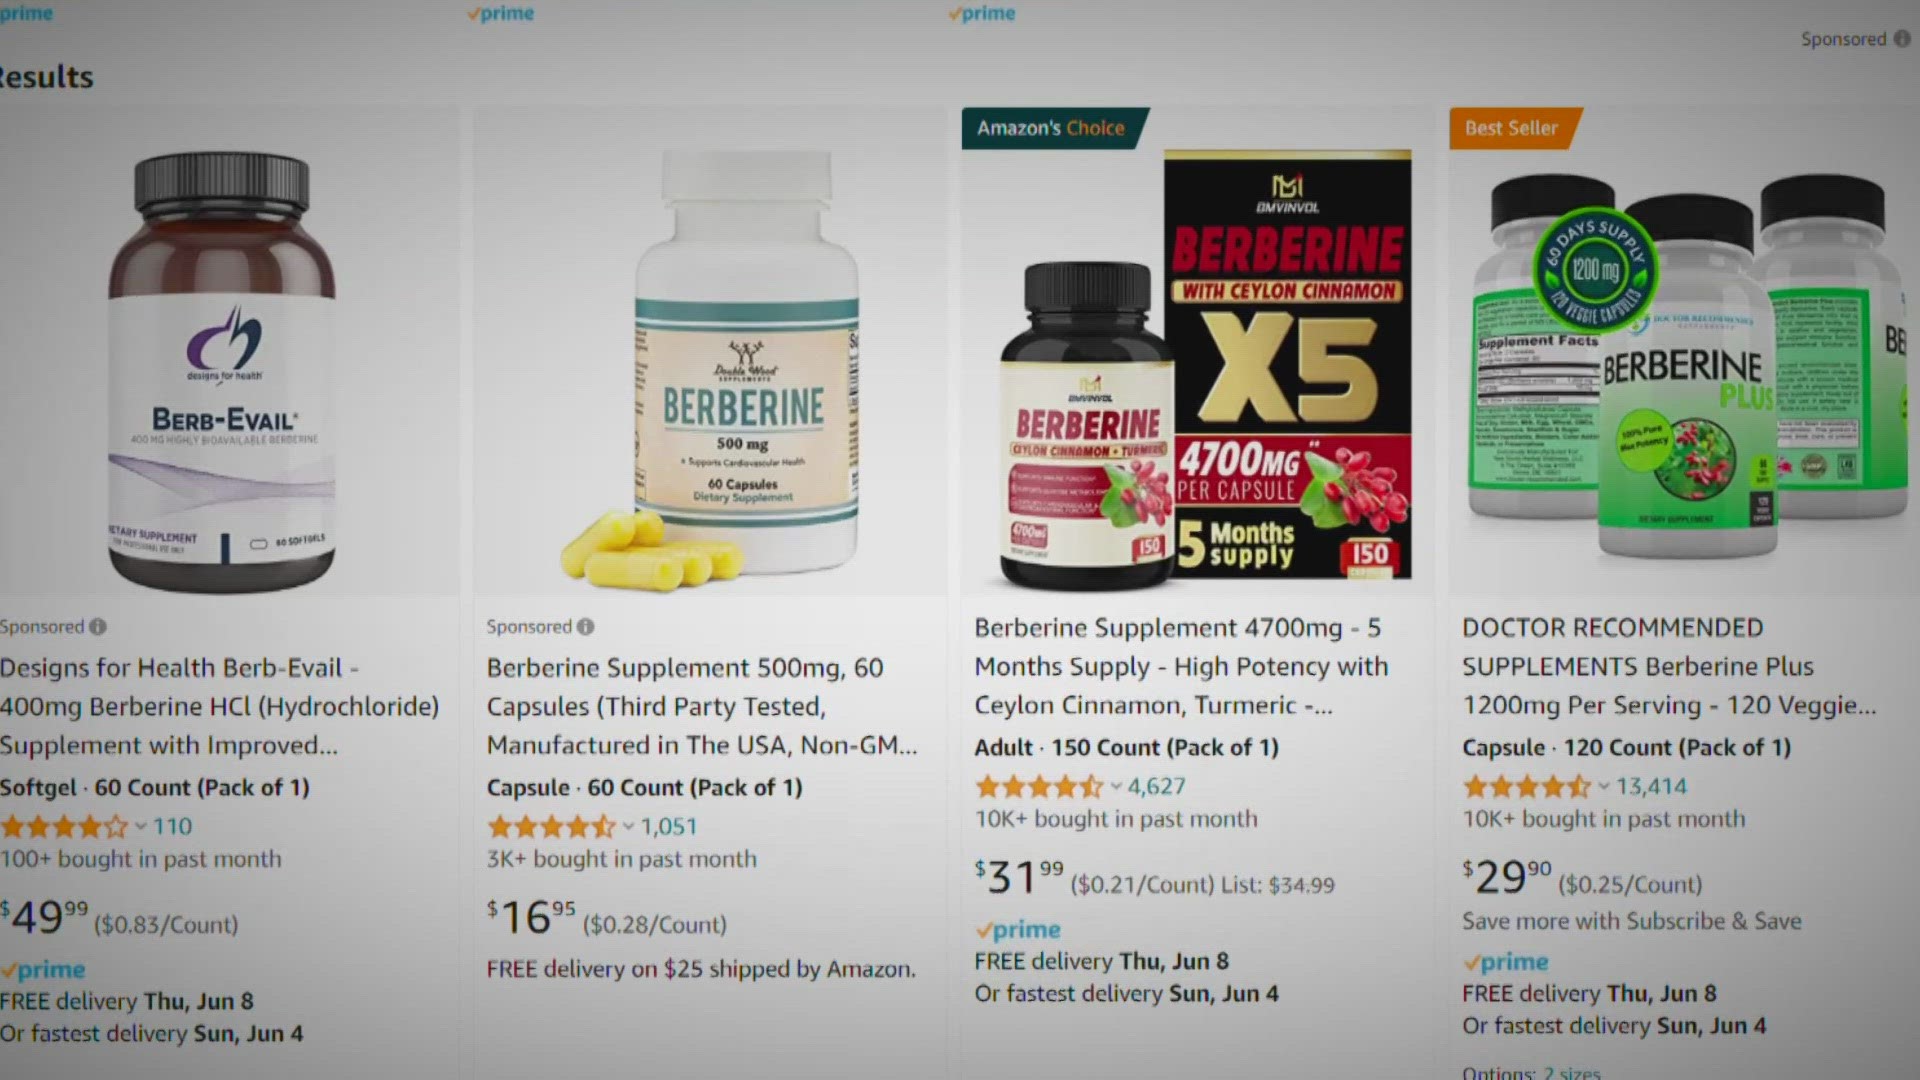 12News talked to a dietician and weight loss expert about berberine, a dietary supplement going viral after social media users claim it's caused weight loss.